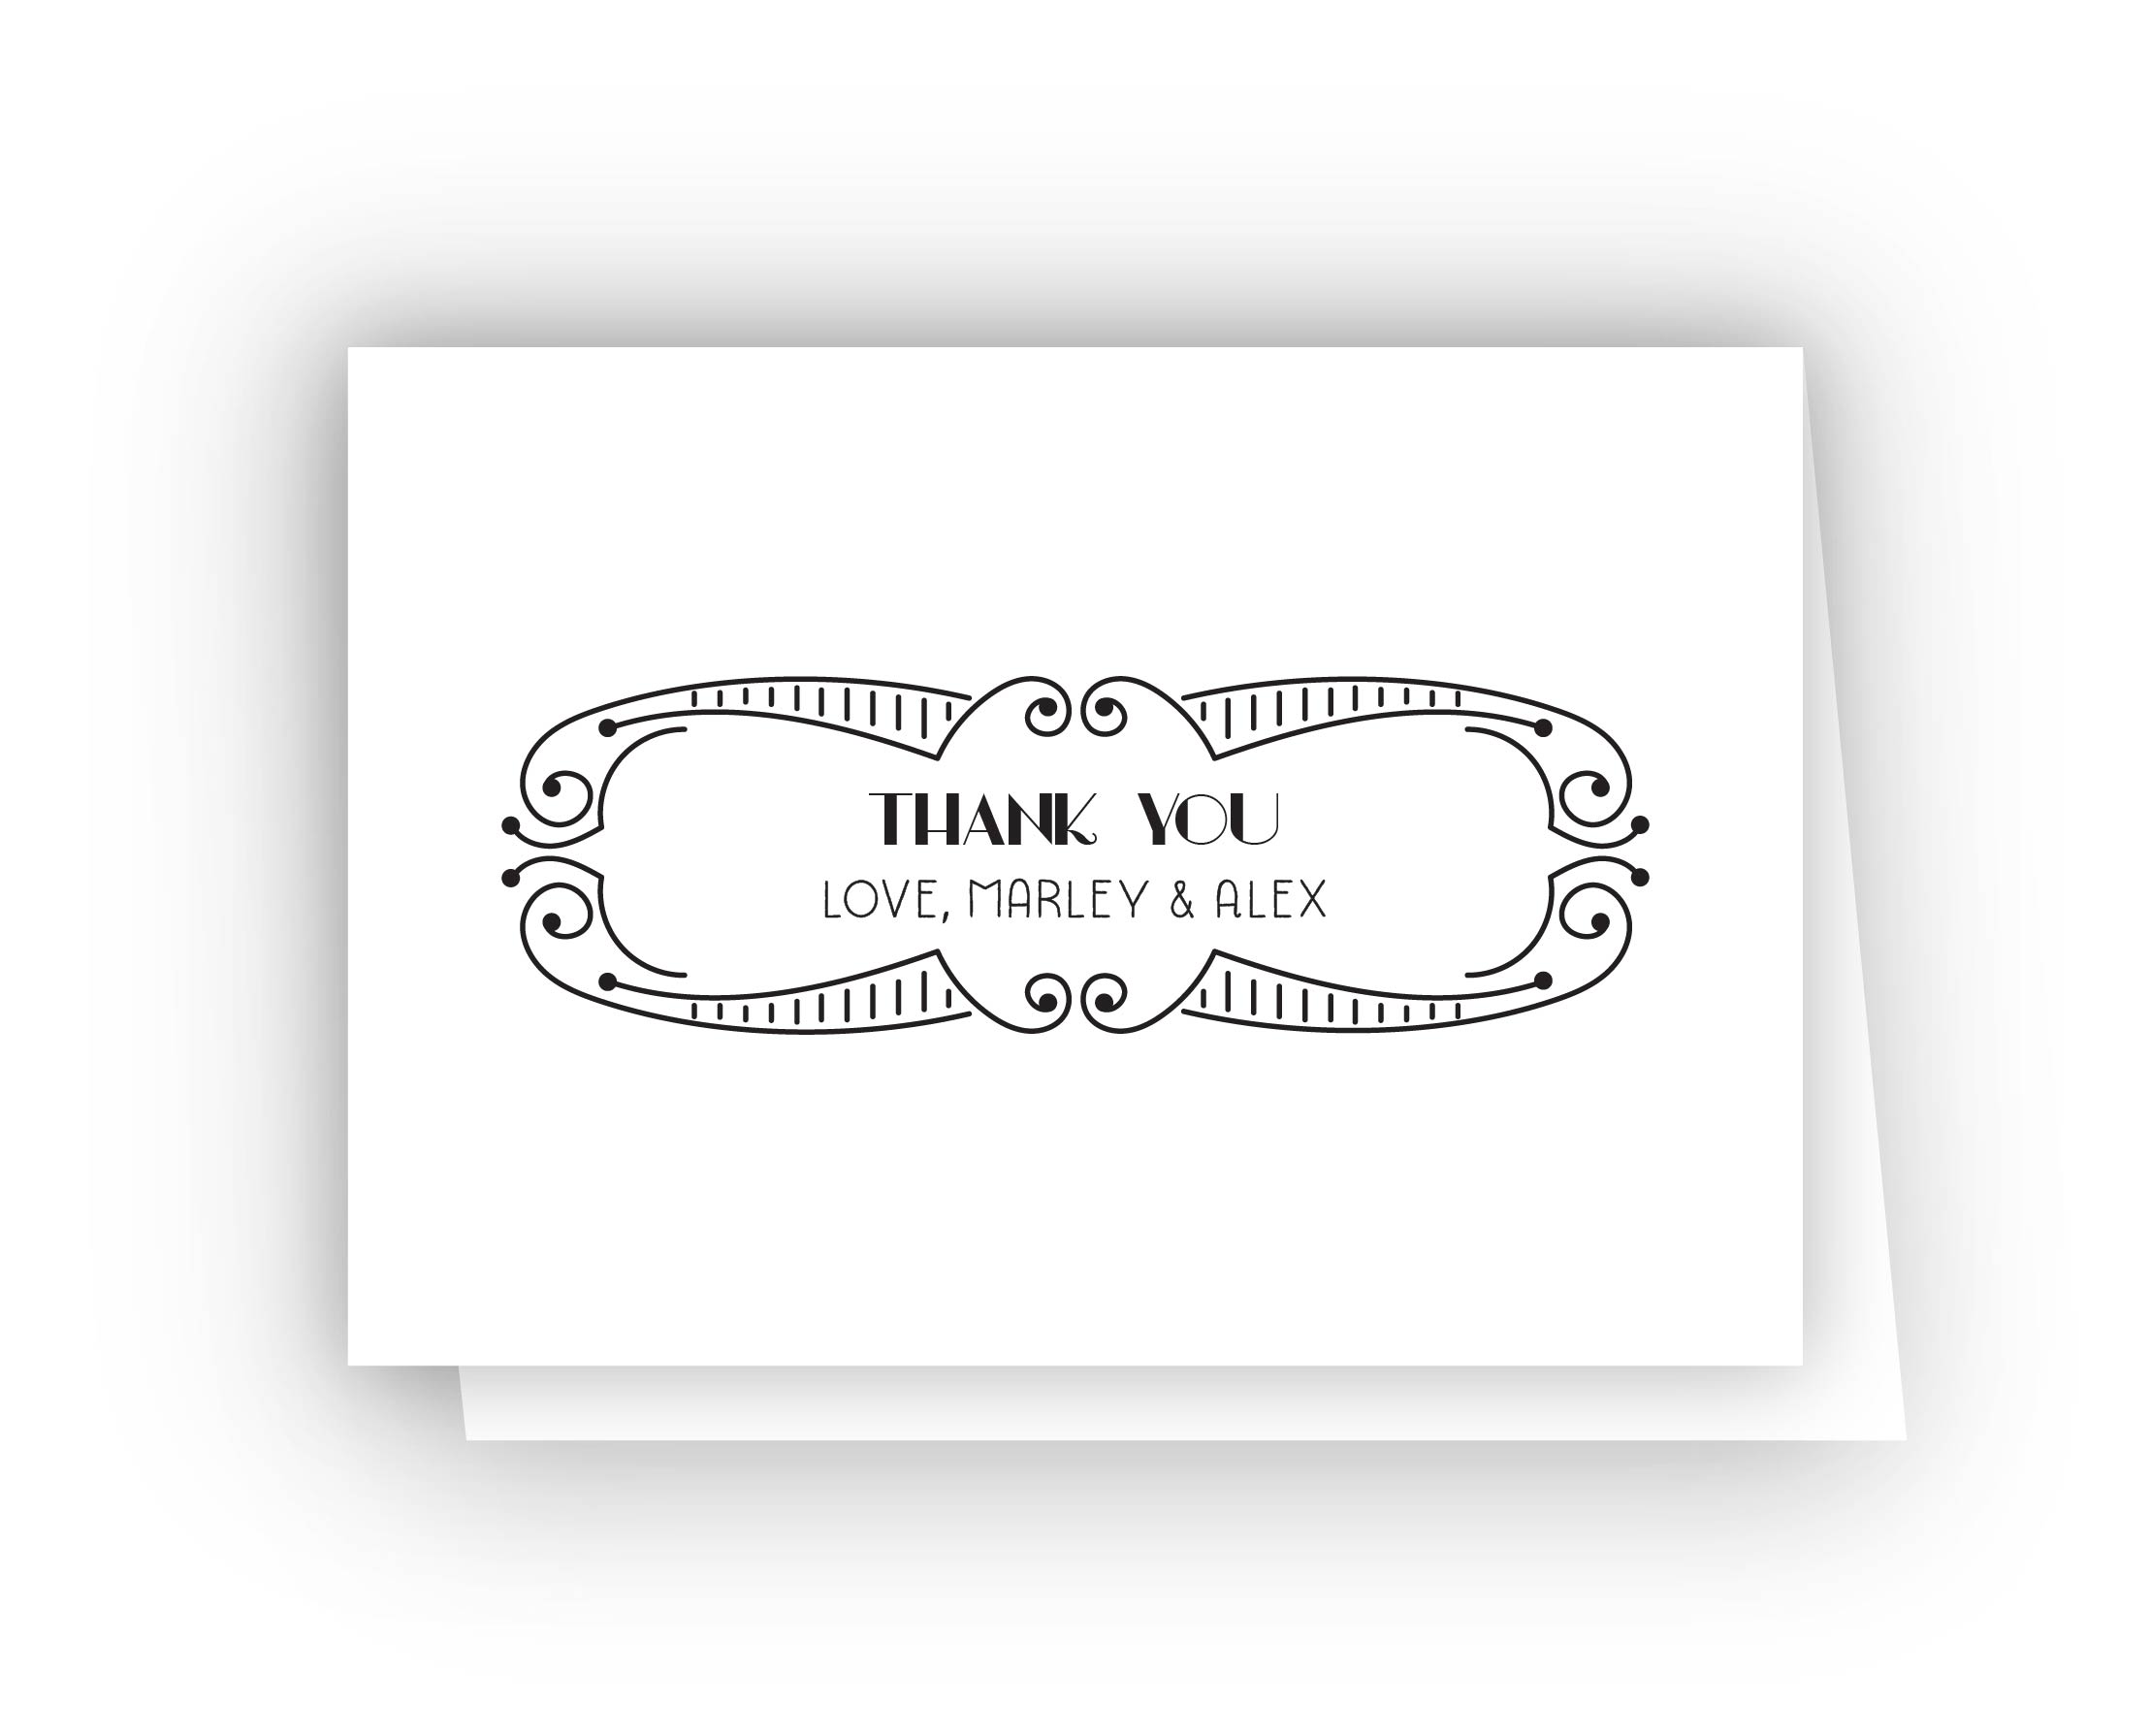 Vintage Marley Thank You Cards